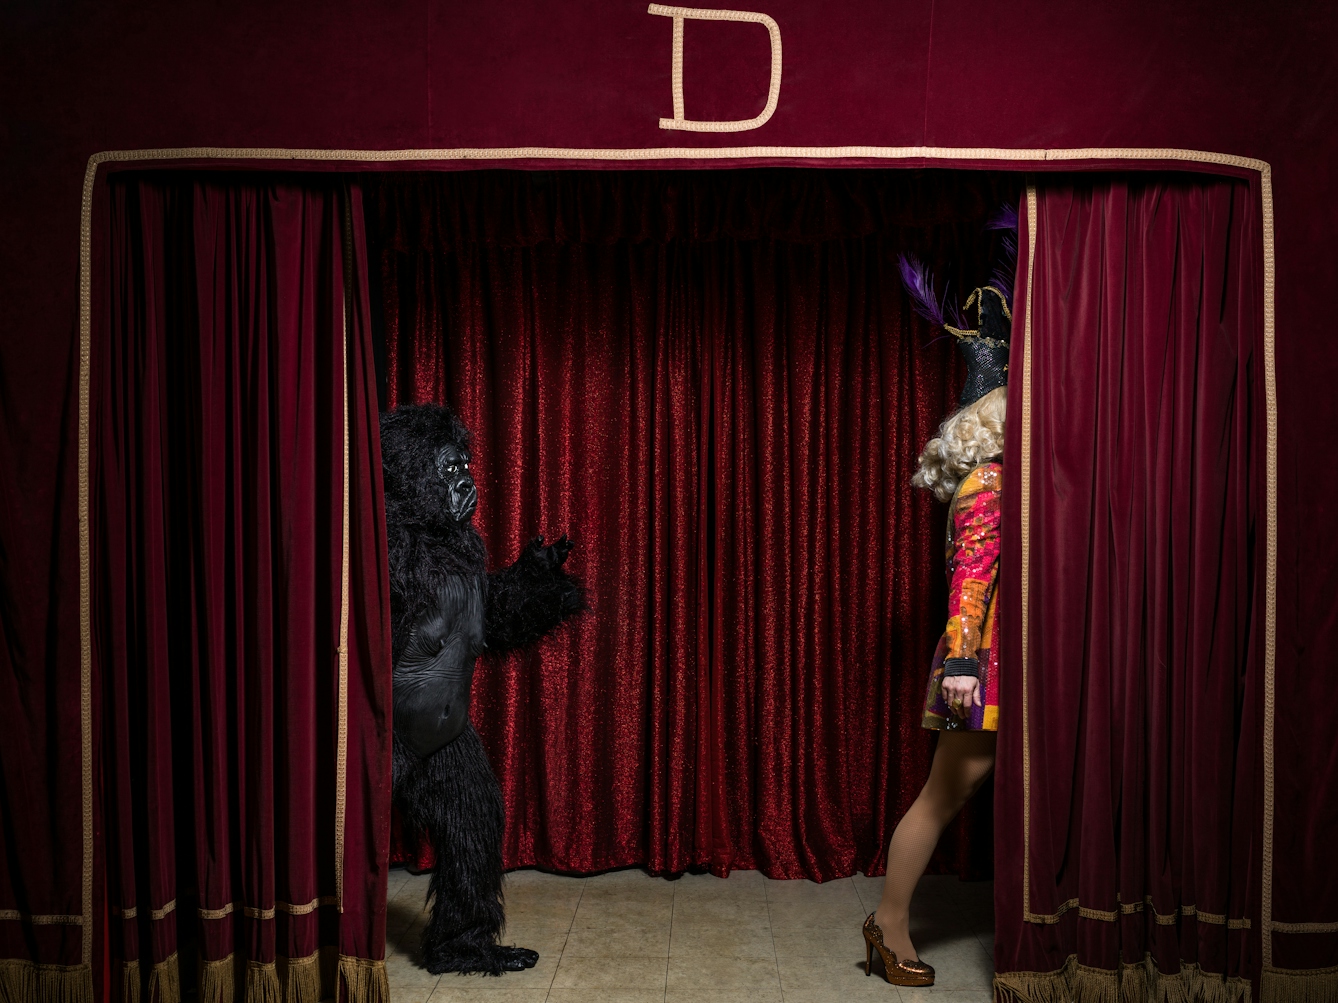 Photograph of a theatre stage made up of red curtains with gold trim. A person in a gorilla costume enters stage left as a colourful magical performer exits stage right.